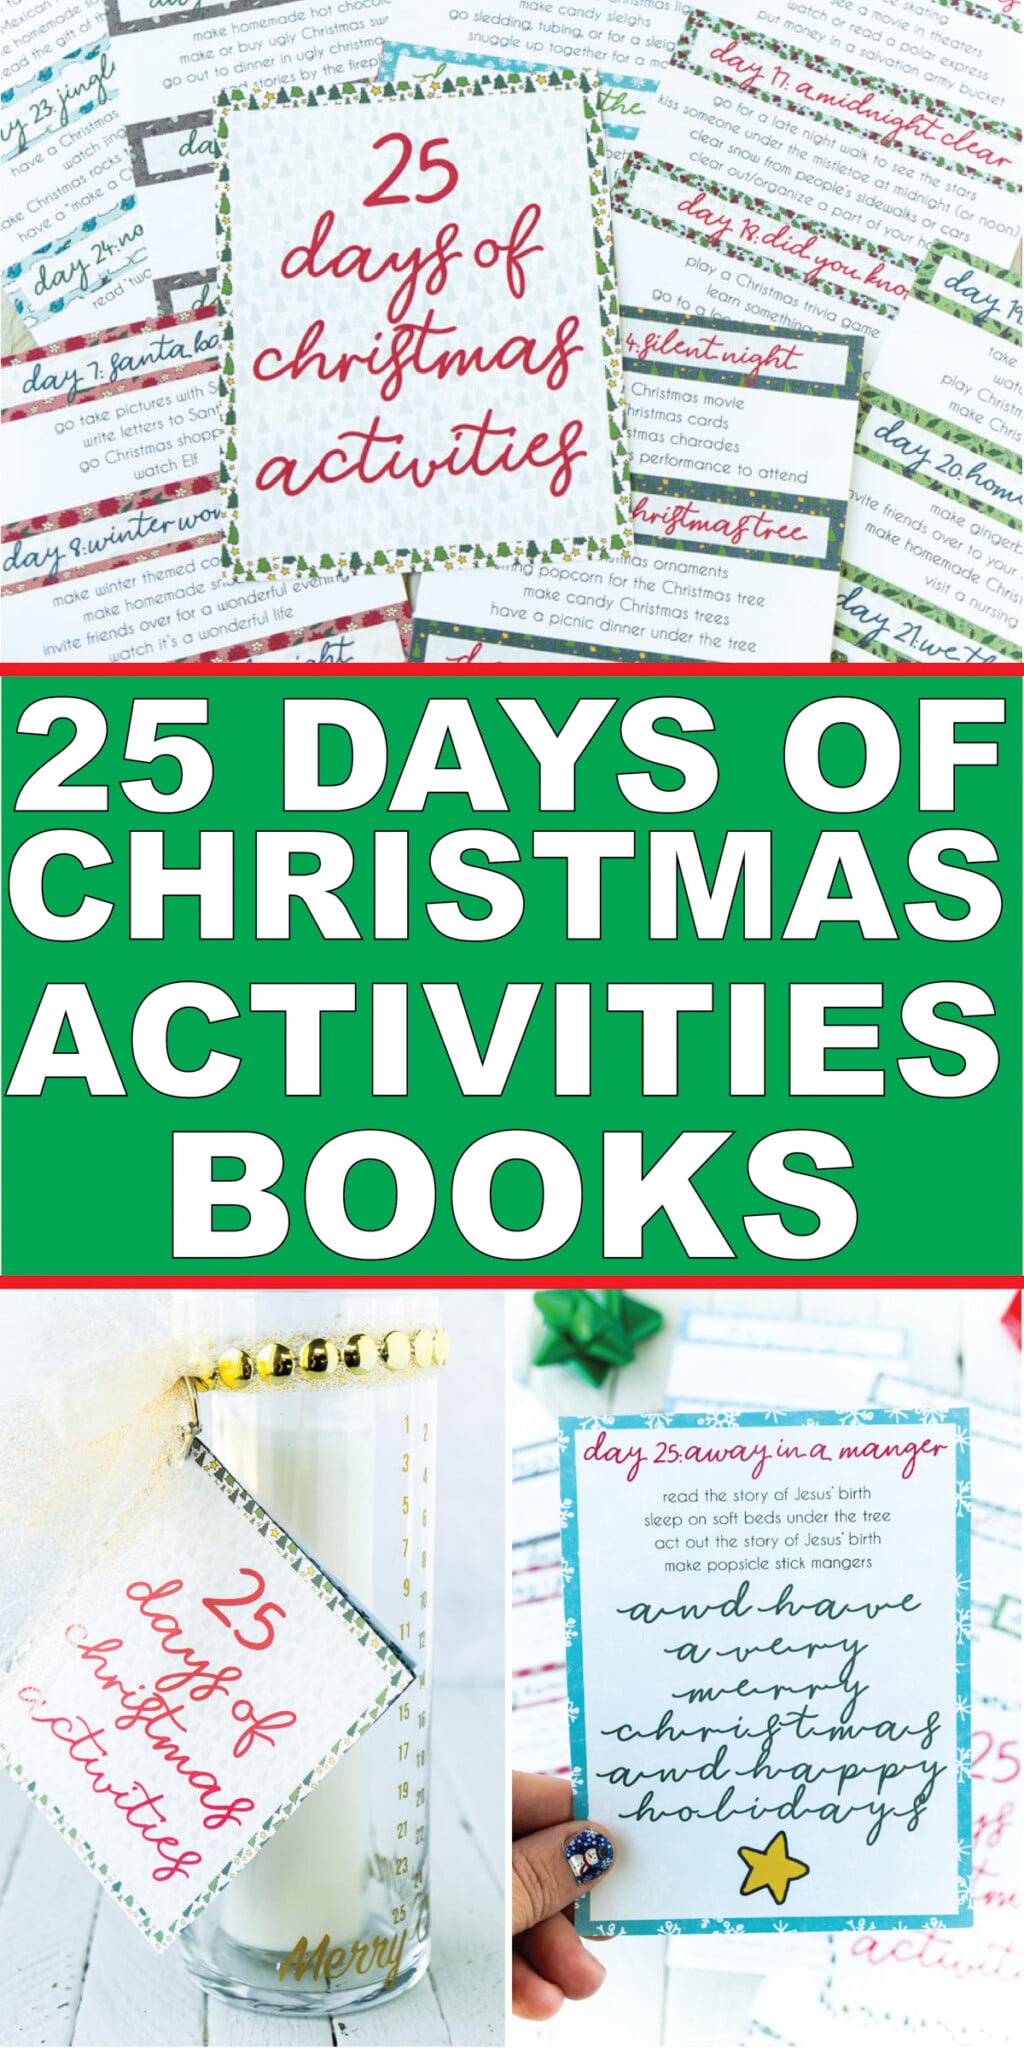 100 Fun Christmas Activities for All Ages  Free Printable   - 99